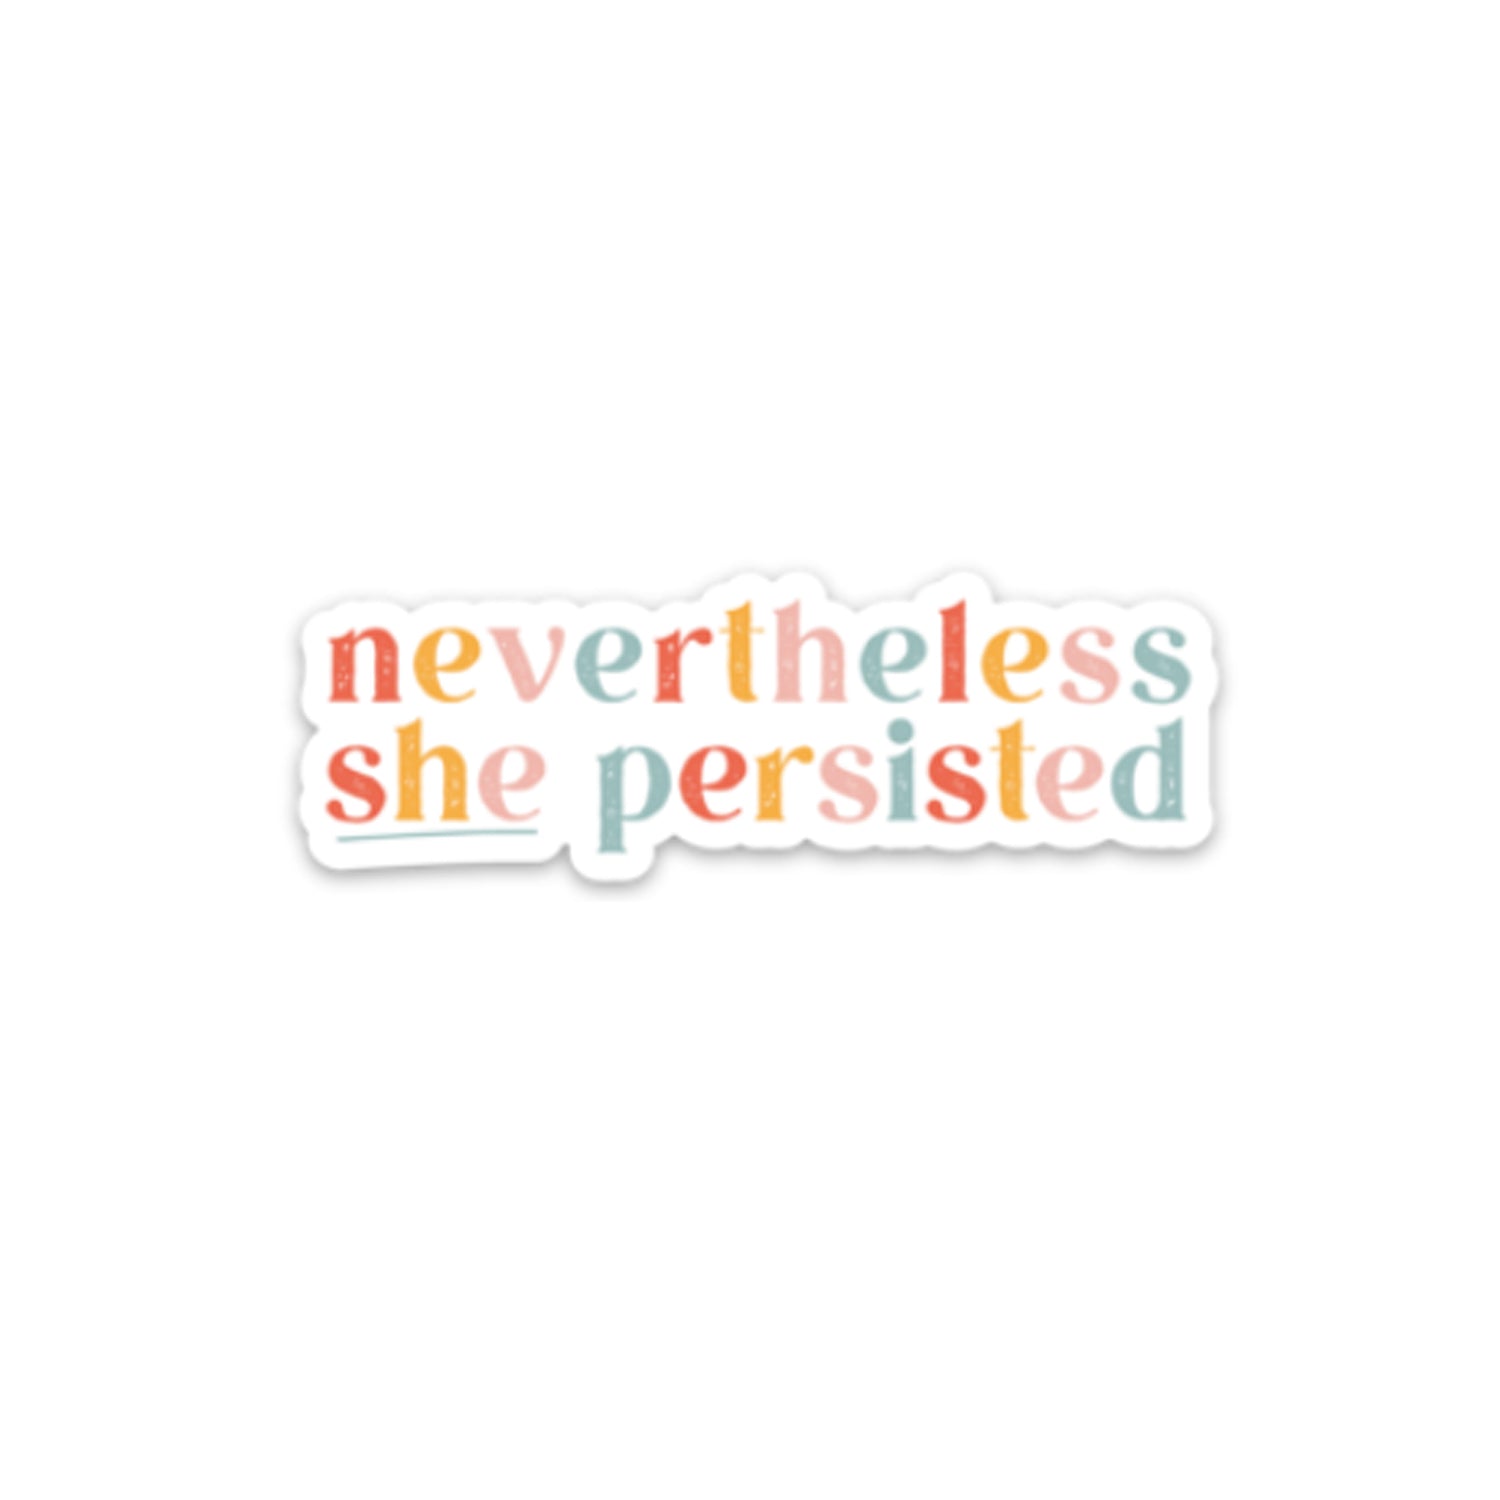 Nevertheless, She Persisted Sticker